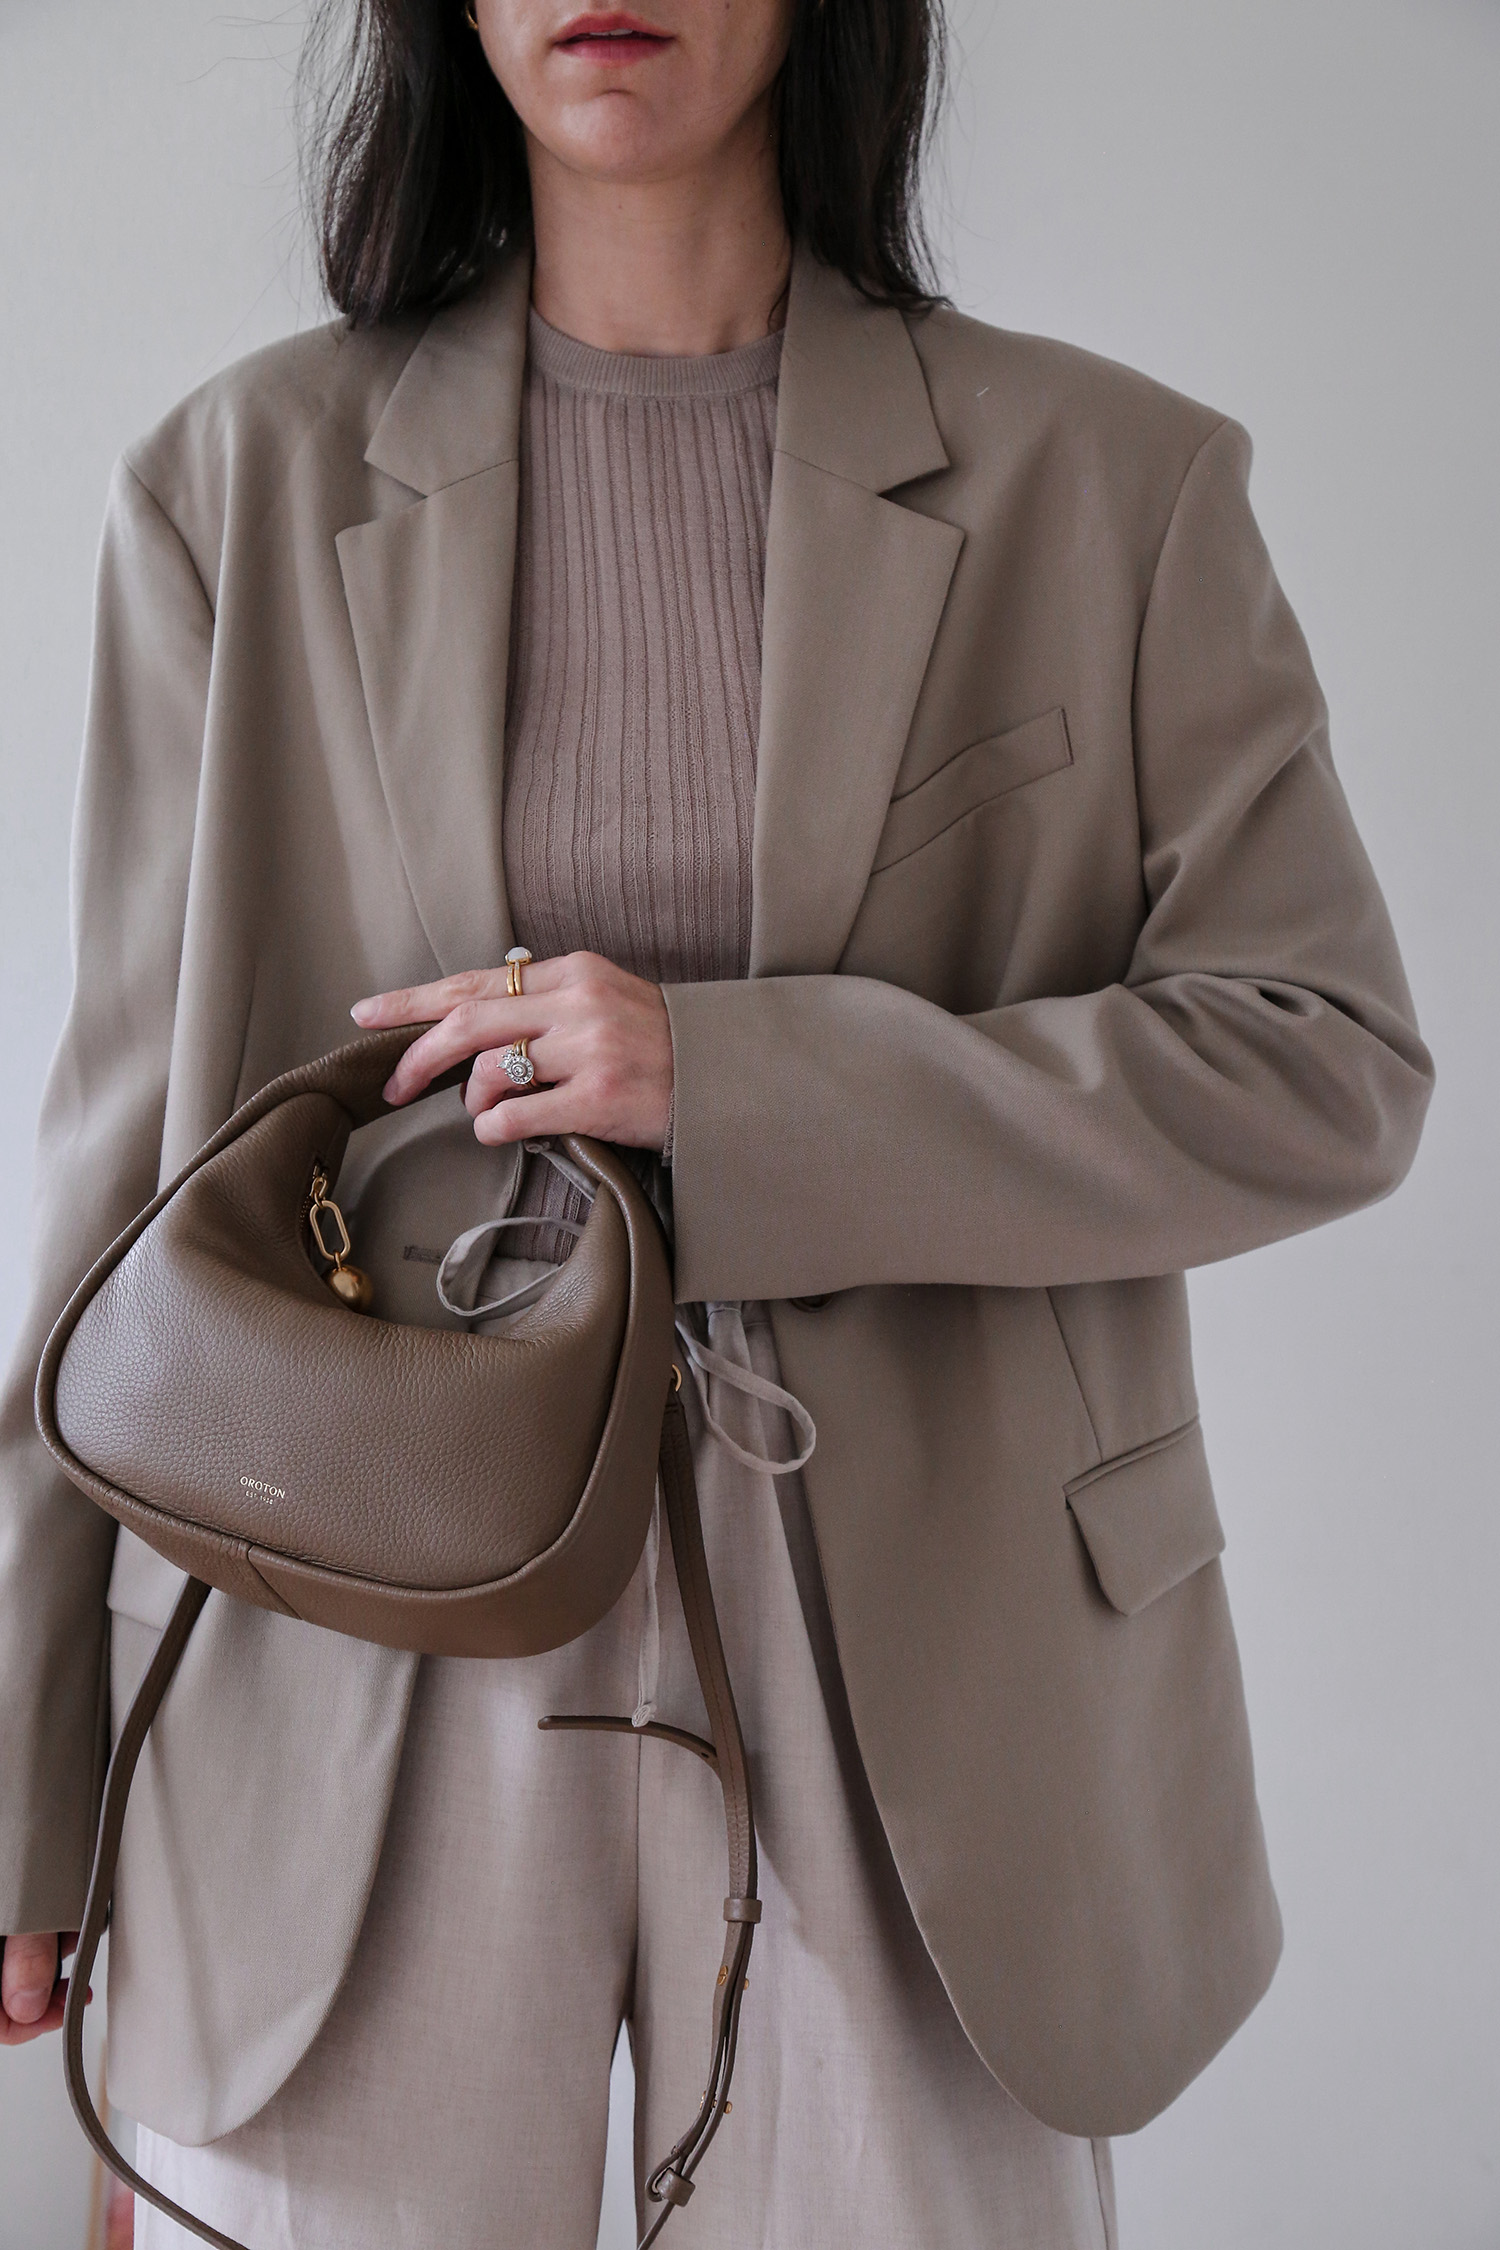 Arket wool hopsack blazer with DISSH harper long sleeve top and fluid drape trousers with Oroton Clara bag